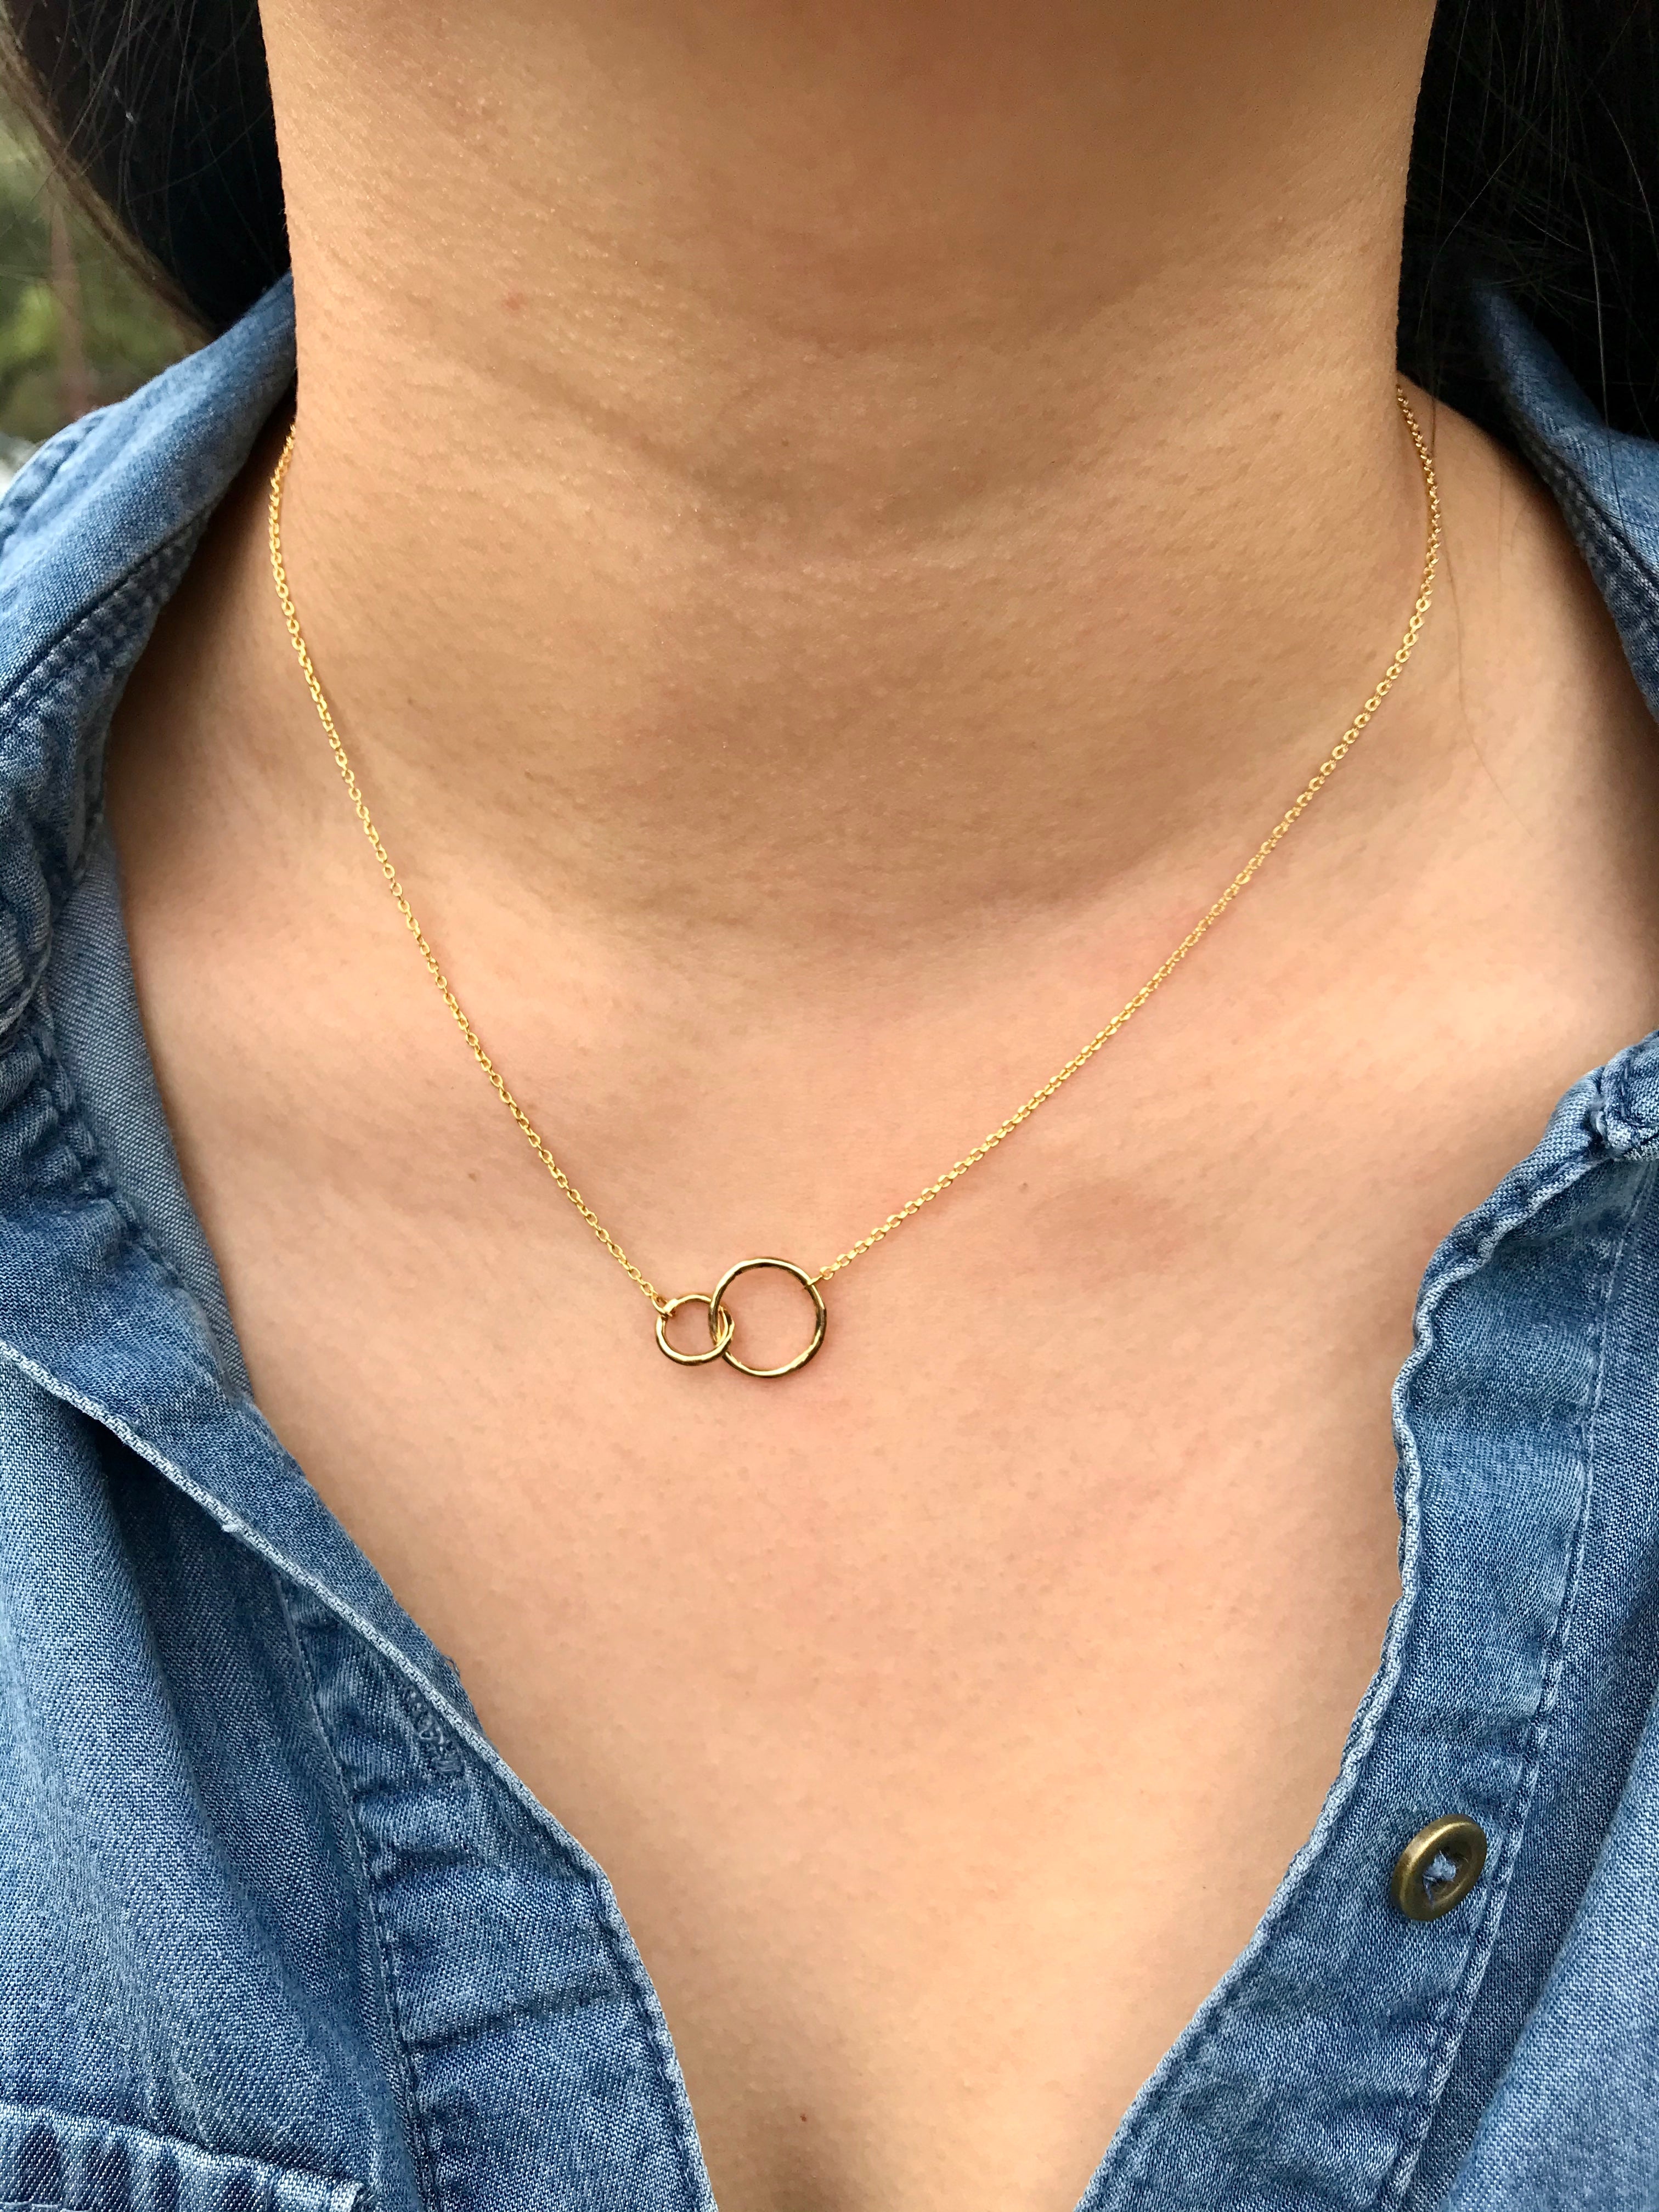 Unbreakable Dainty Necklace